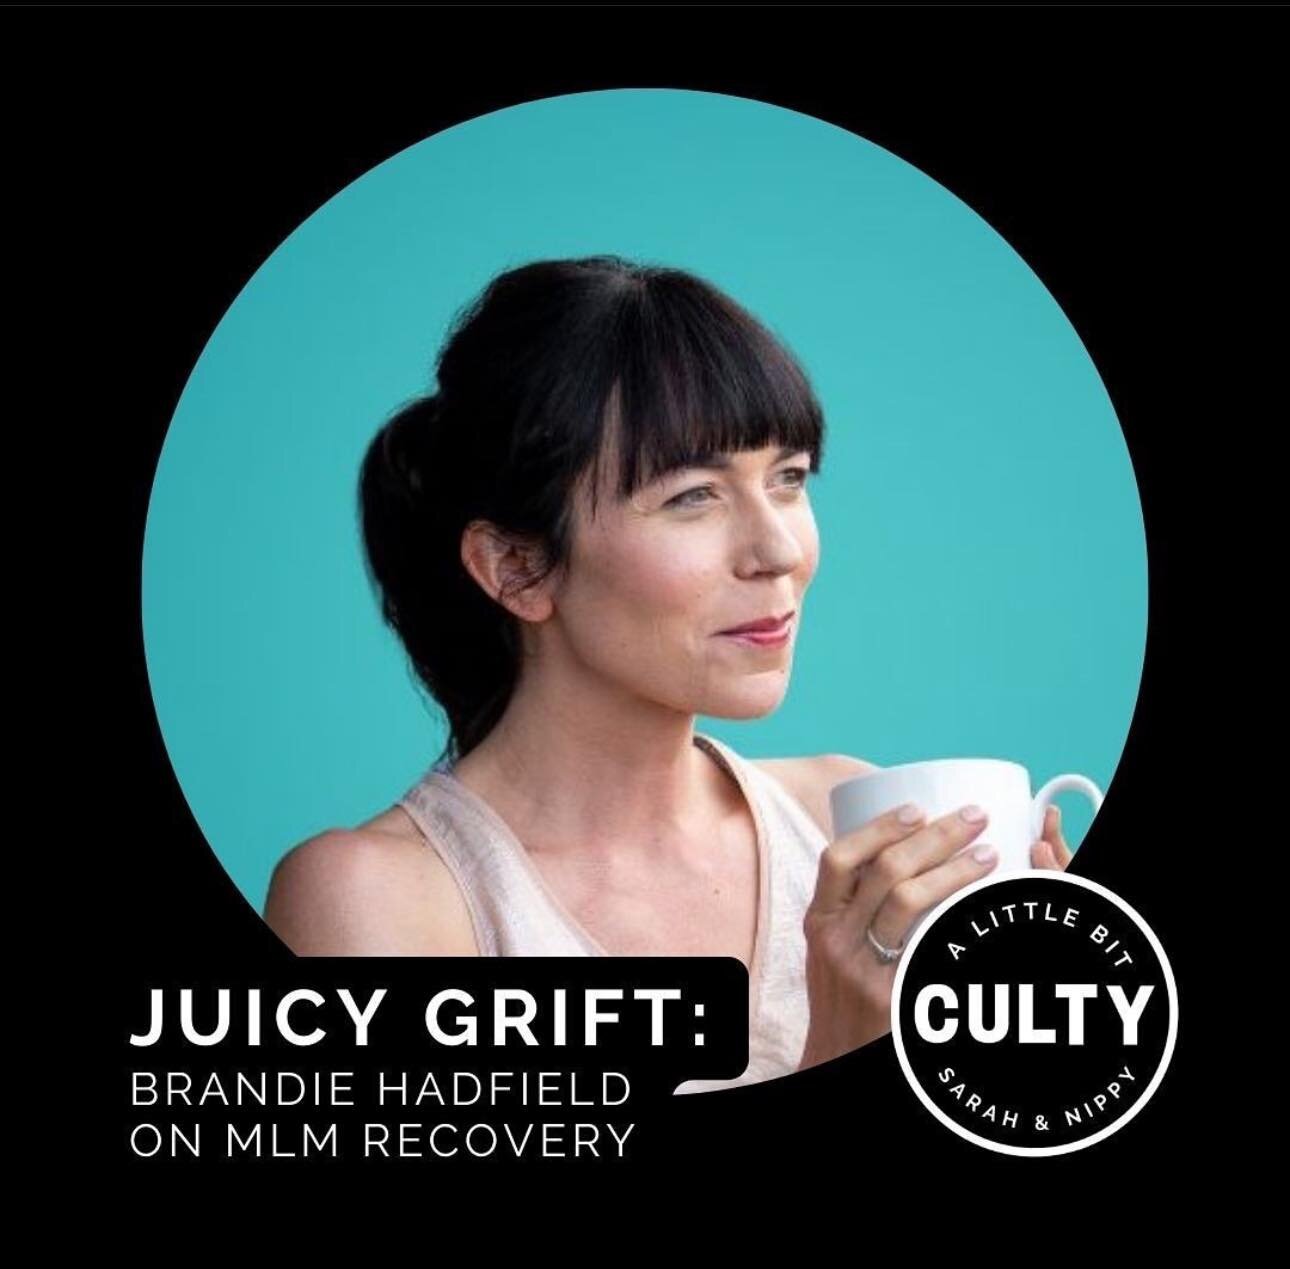 Okay, okay. We know we&rsquo;re on a little breaky-break for the holidays, but how could we not share our friend, Brandie Hadfield&rsquo;s new episode on A Little Bit Culty?

Take some time to listen today, maybe while sipping some tea, wrapping gift